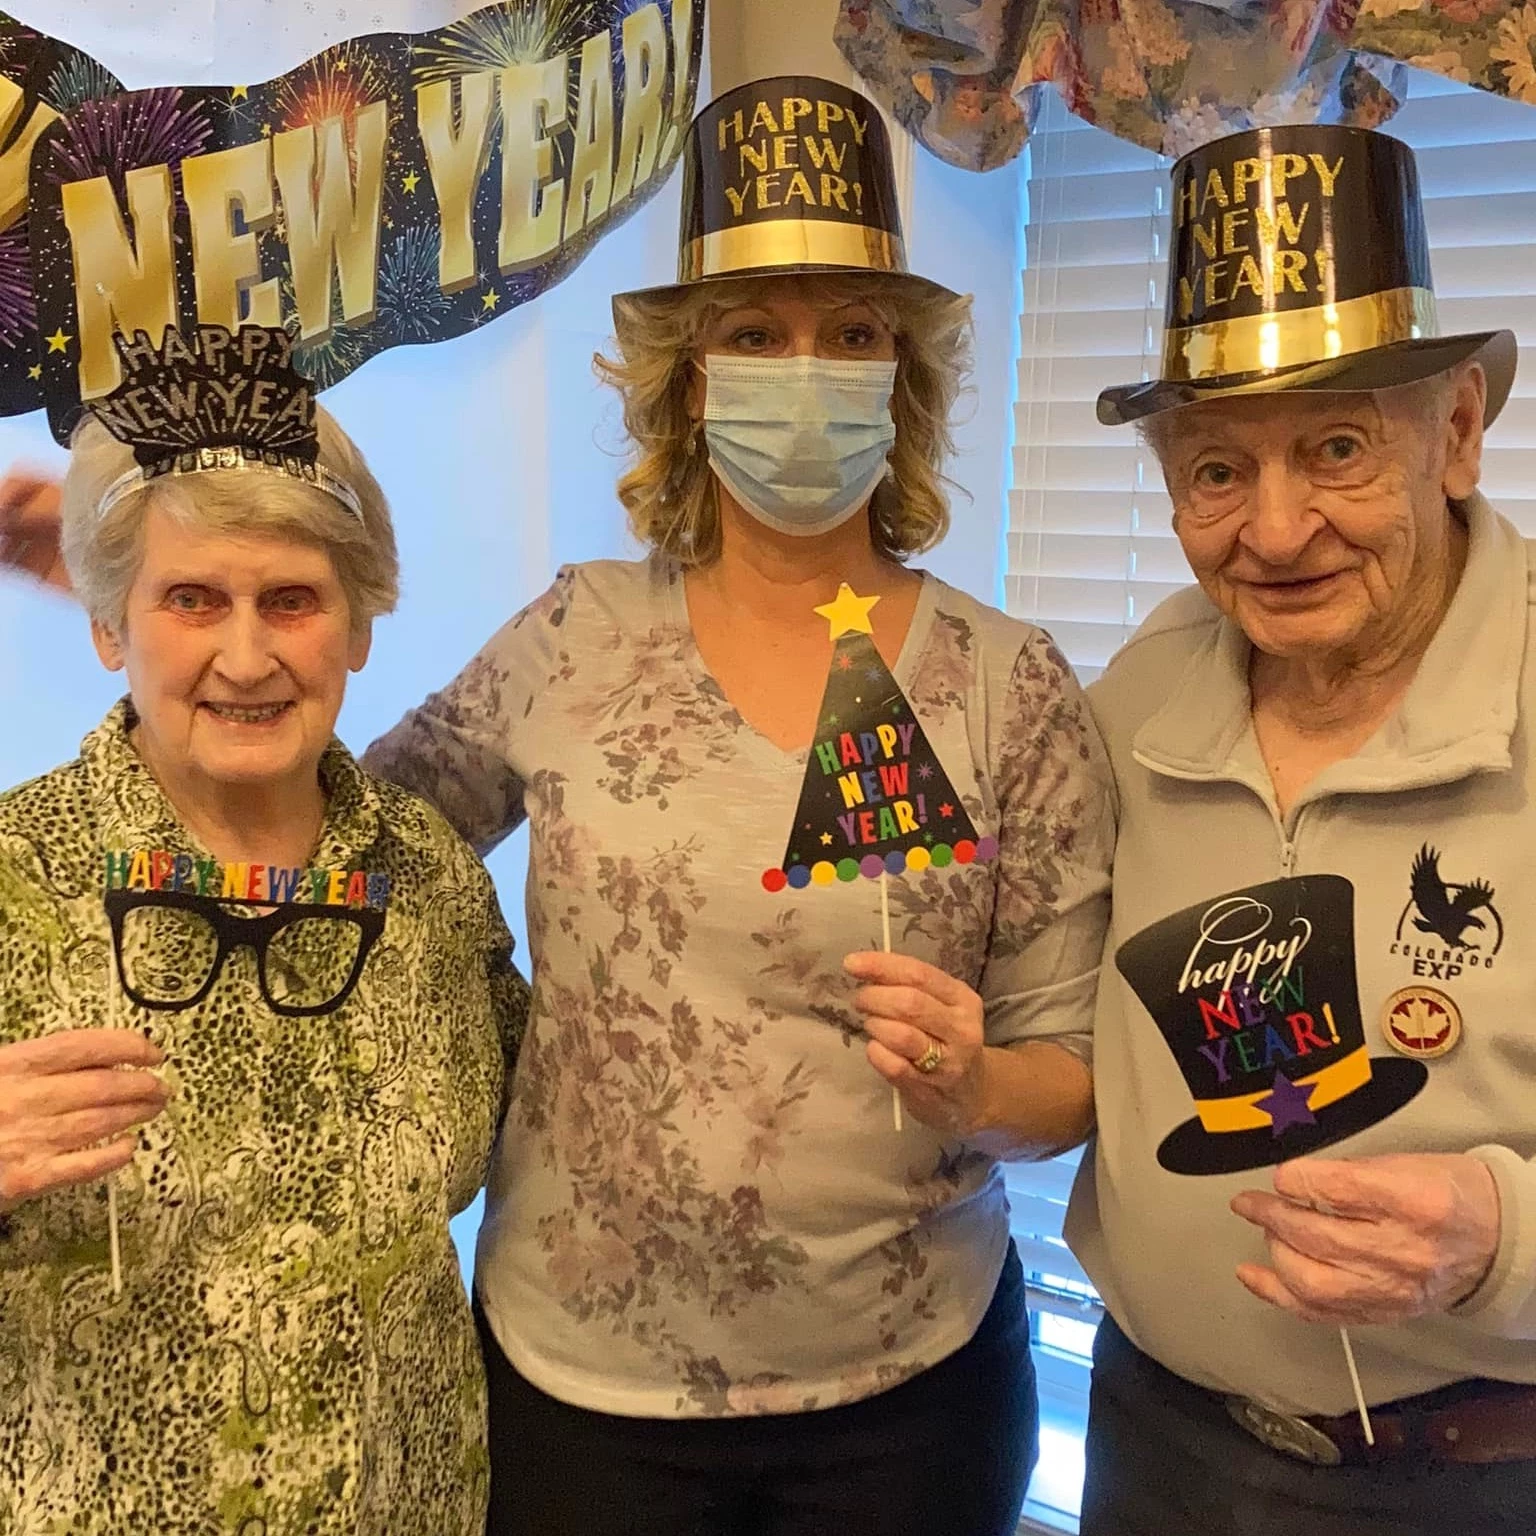 A group of senior citizens having fun on new year party